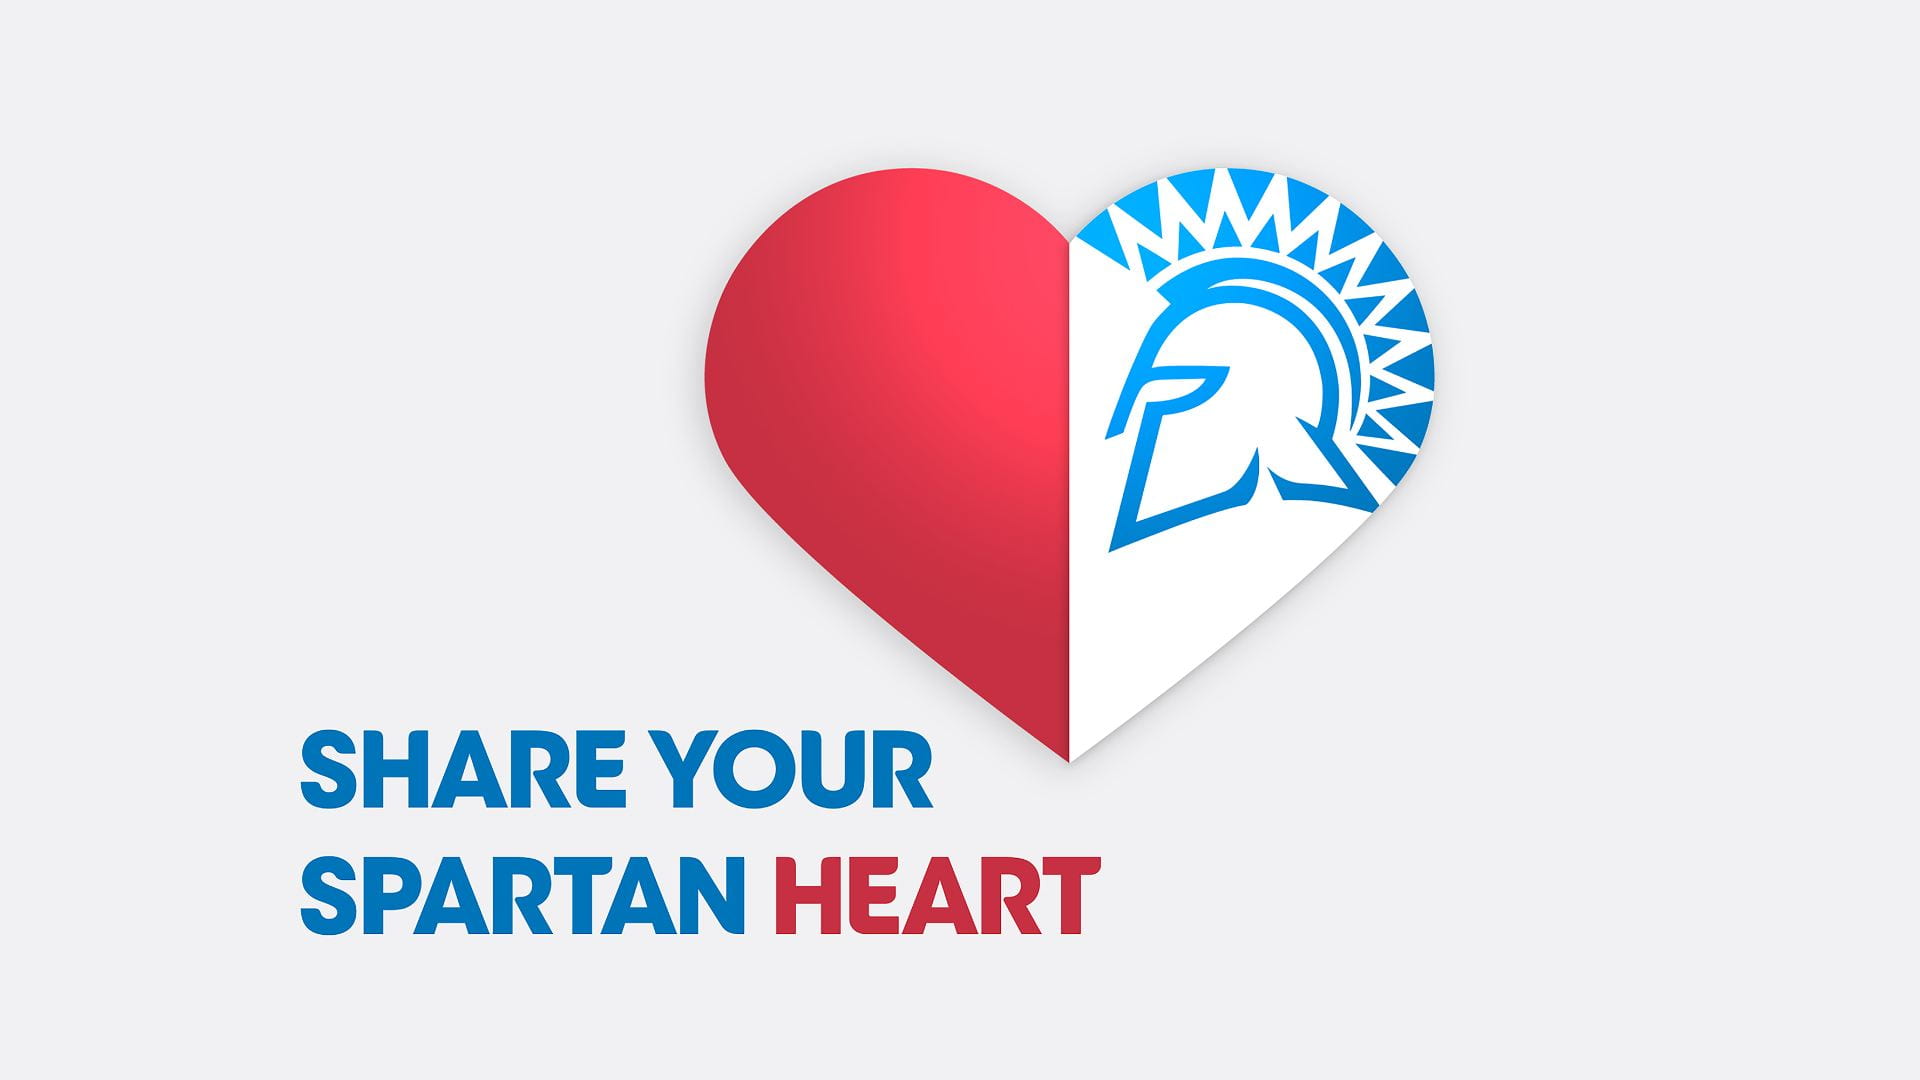 SJSU Launches Share Your Spartan Heart Campaign